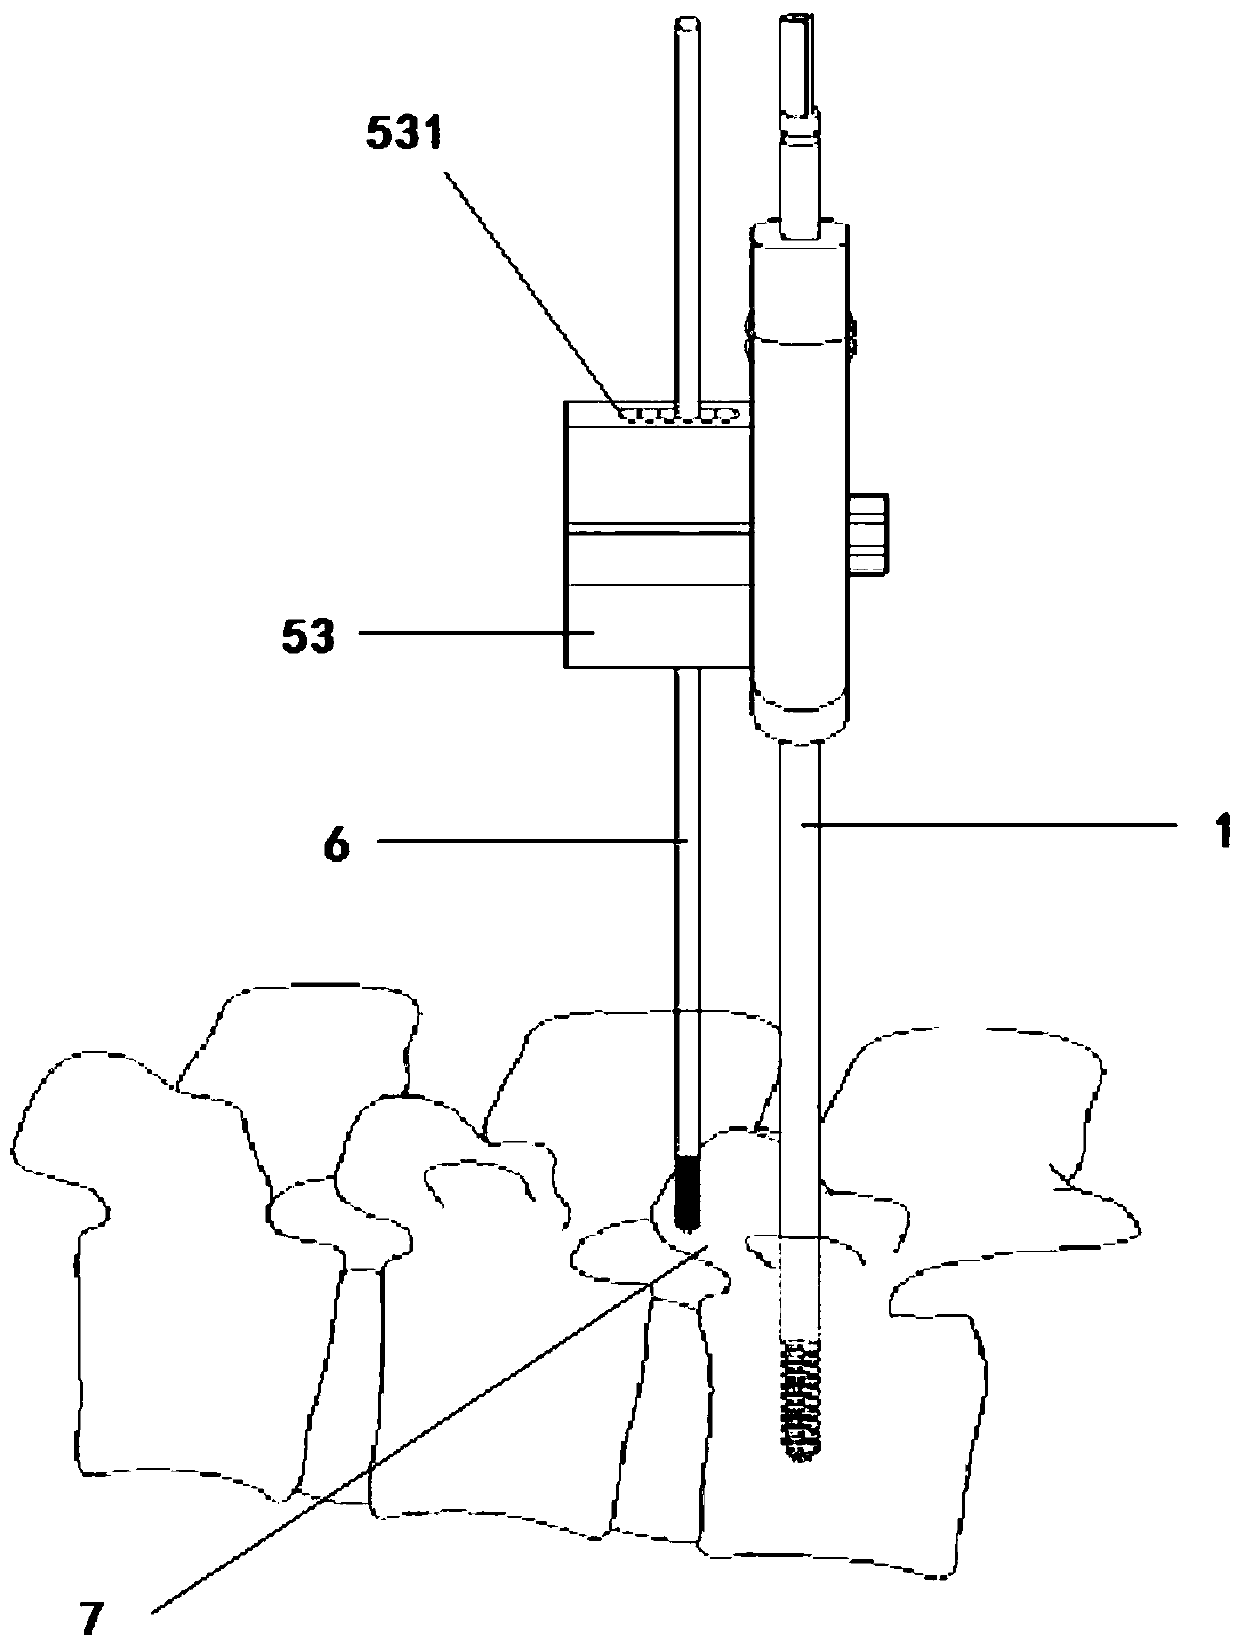 Minimally invasive facetectomy guiding and positioning device and minimally invasive facetectomy guiding and positioning instrument assembly